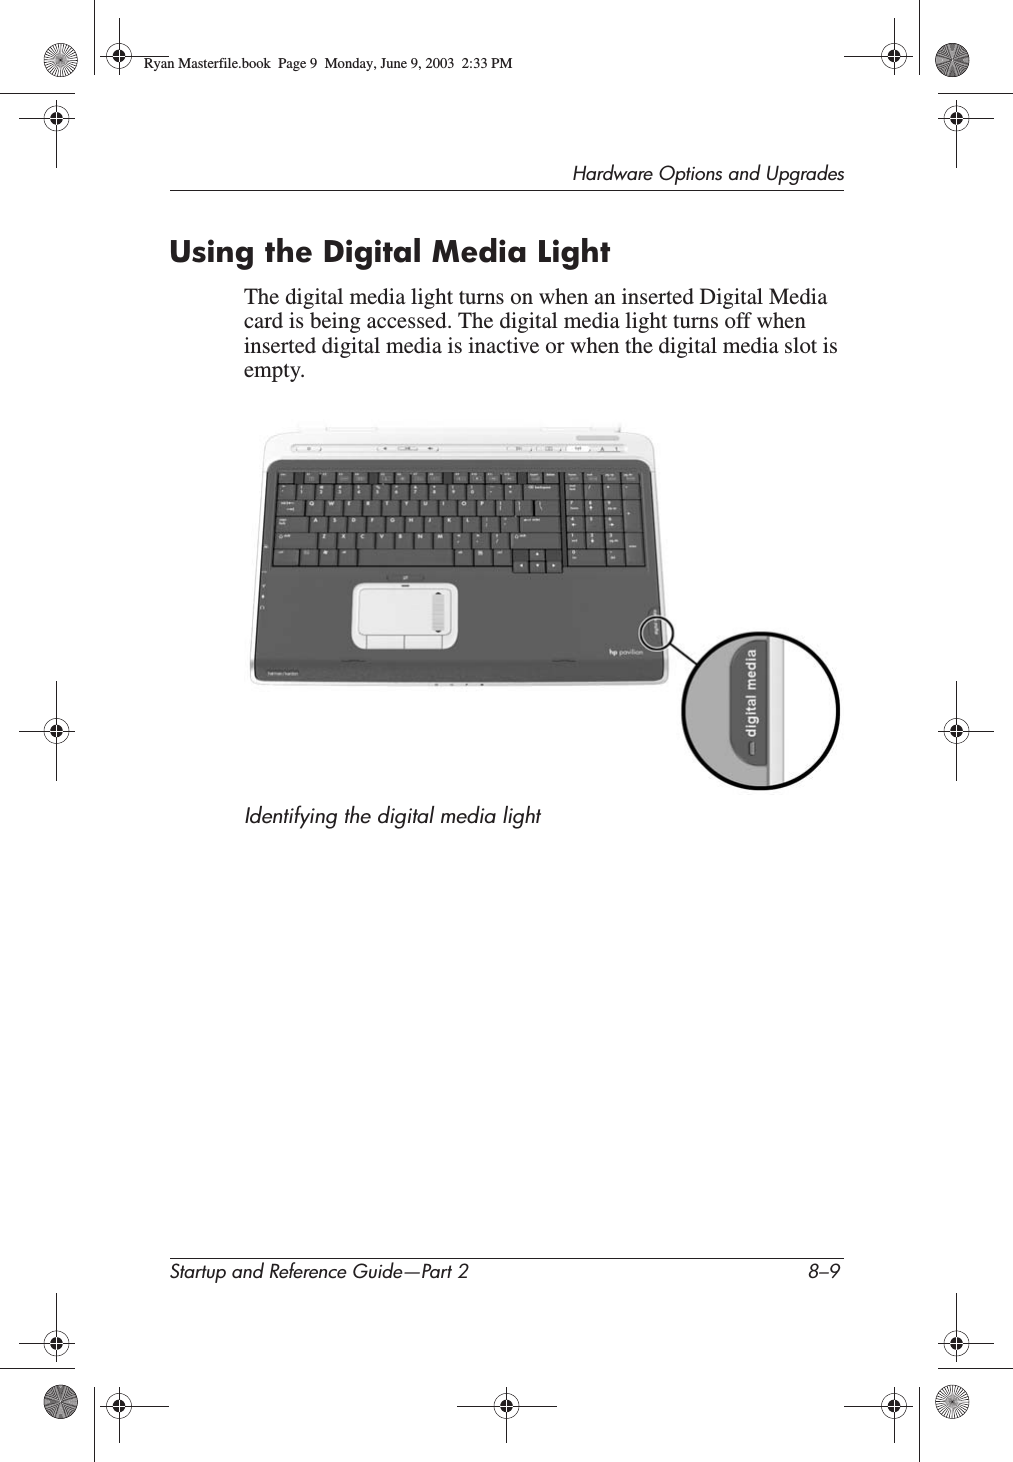 Hardware Options and UpgradesStartup and Reference Guide—Part 2 8–9Using the Digital Media LightThe digital media light turns on when an inserted Digital Media card is being accessed. The digital media light turns off when inserted digital media is inactive or when the digital media slot is empty.Identifying the digital media lightRyan Masterfile.book  Page 9  Monday, June 9, 2003  2:33 PM